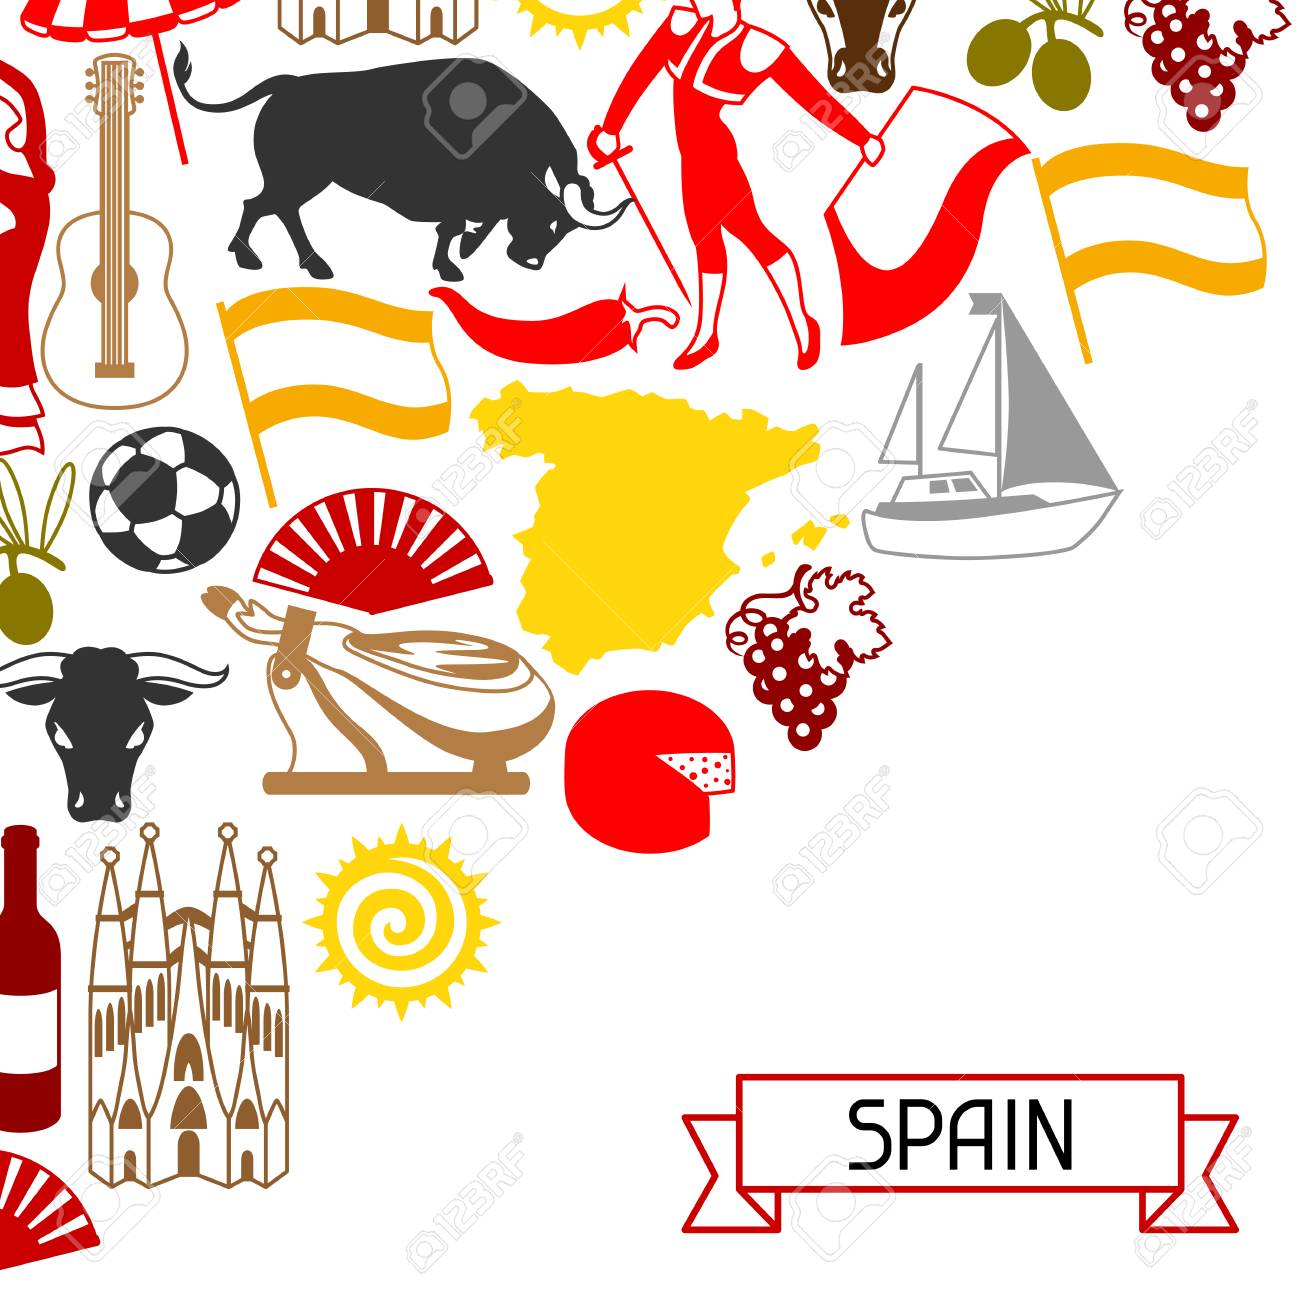 Spain Background Design Spanish Traditional Symbols And Objects